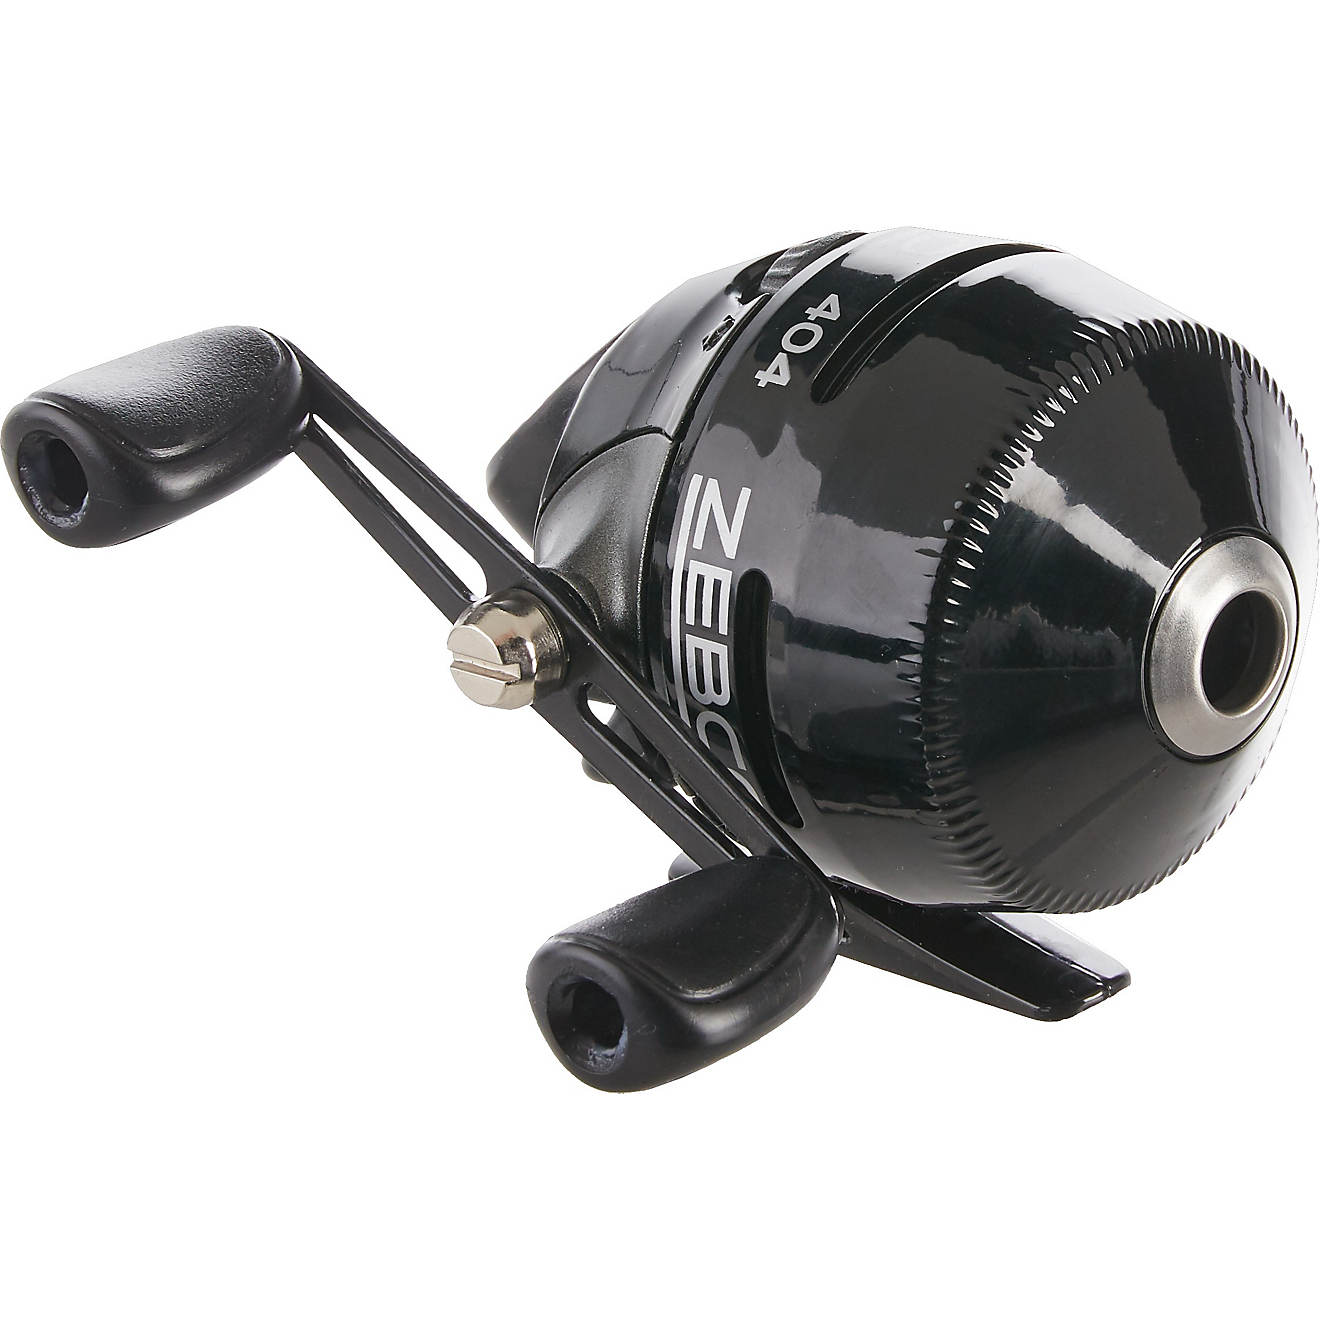 2.8:1  15 POUND LINE TWO NEW RED ZEBCO 404 SPINCAST FISHING REEL Gear Ratio 